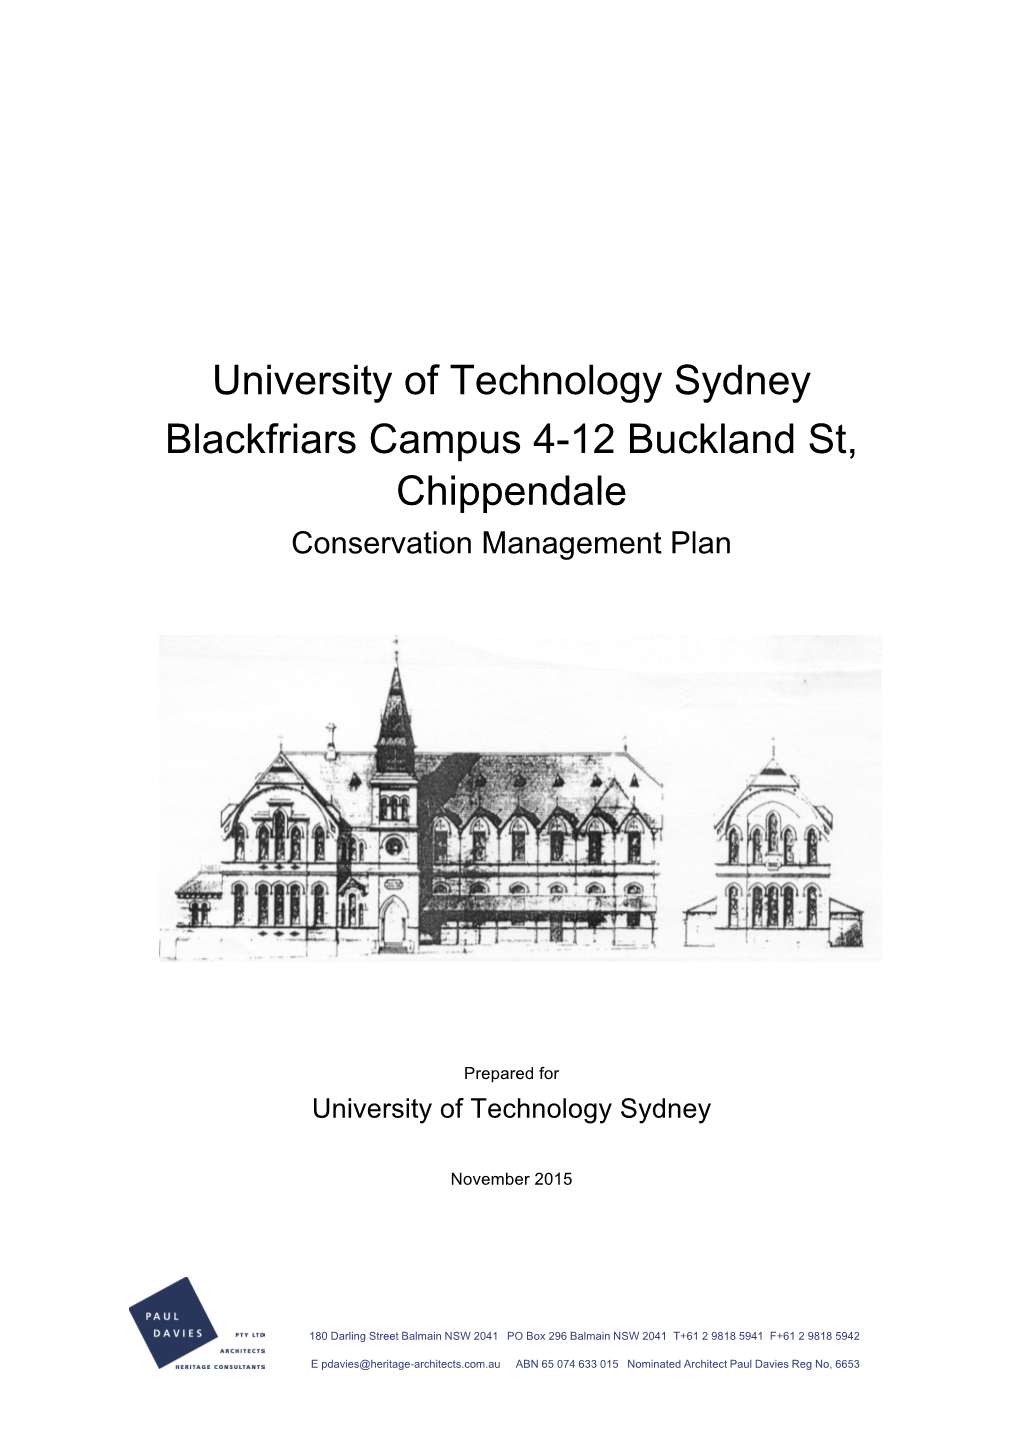 University of Technology Sydney Blackfriars Campus 4-12 Buckland St, Chippendale Conservation Management Plan